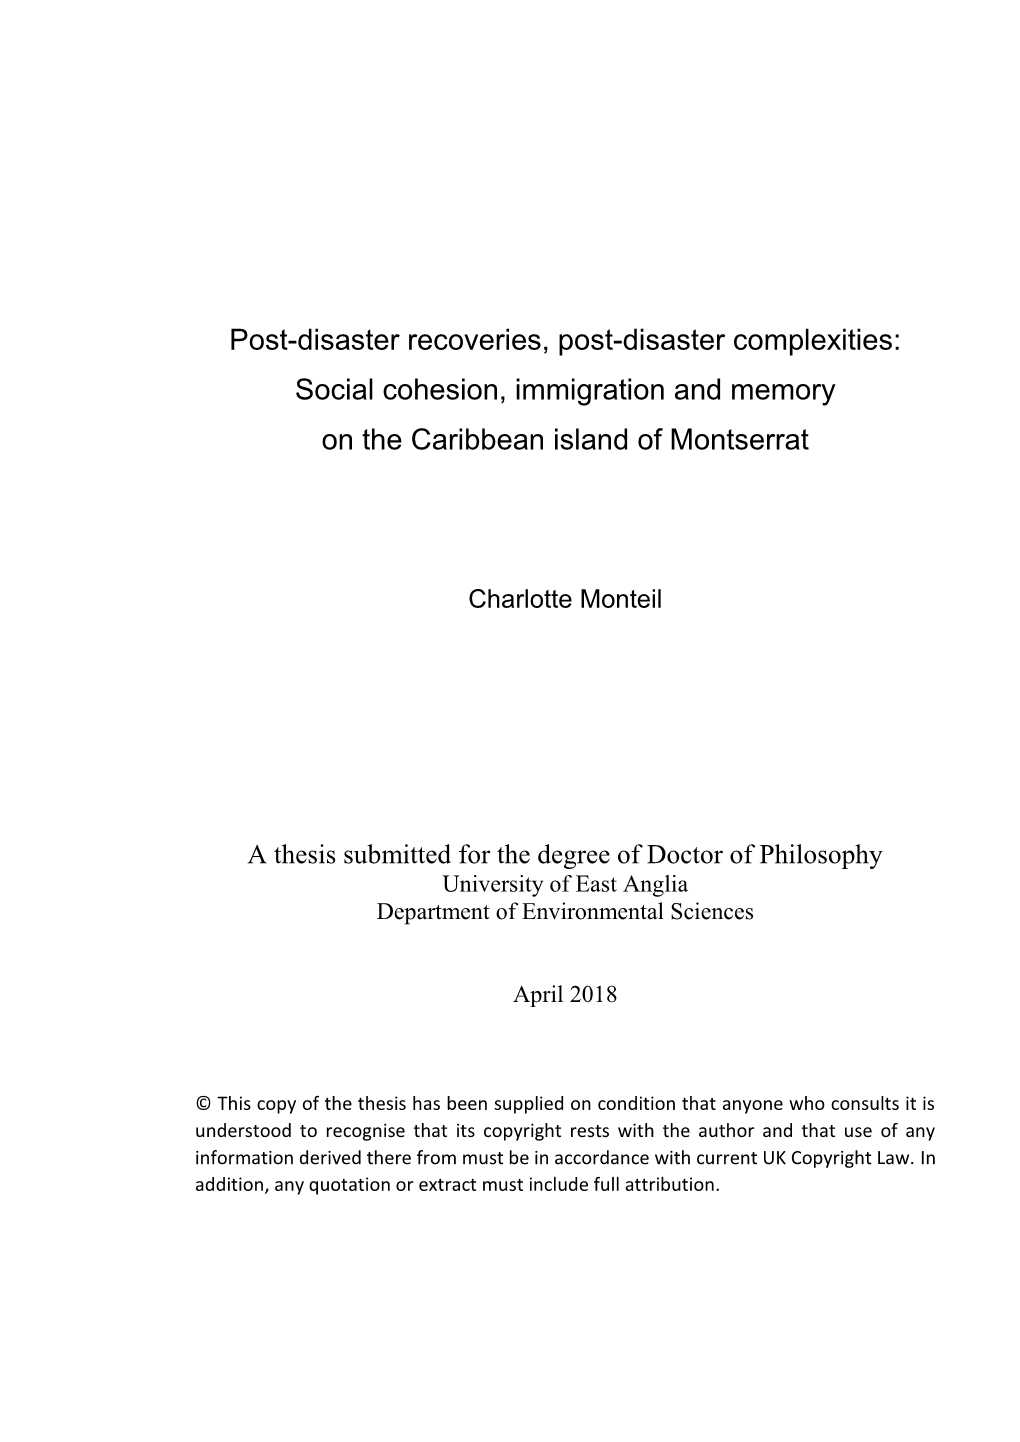 Social Cohesion, Immigration and Memory on the Caribbean Island of Montserrat